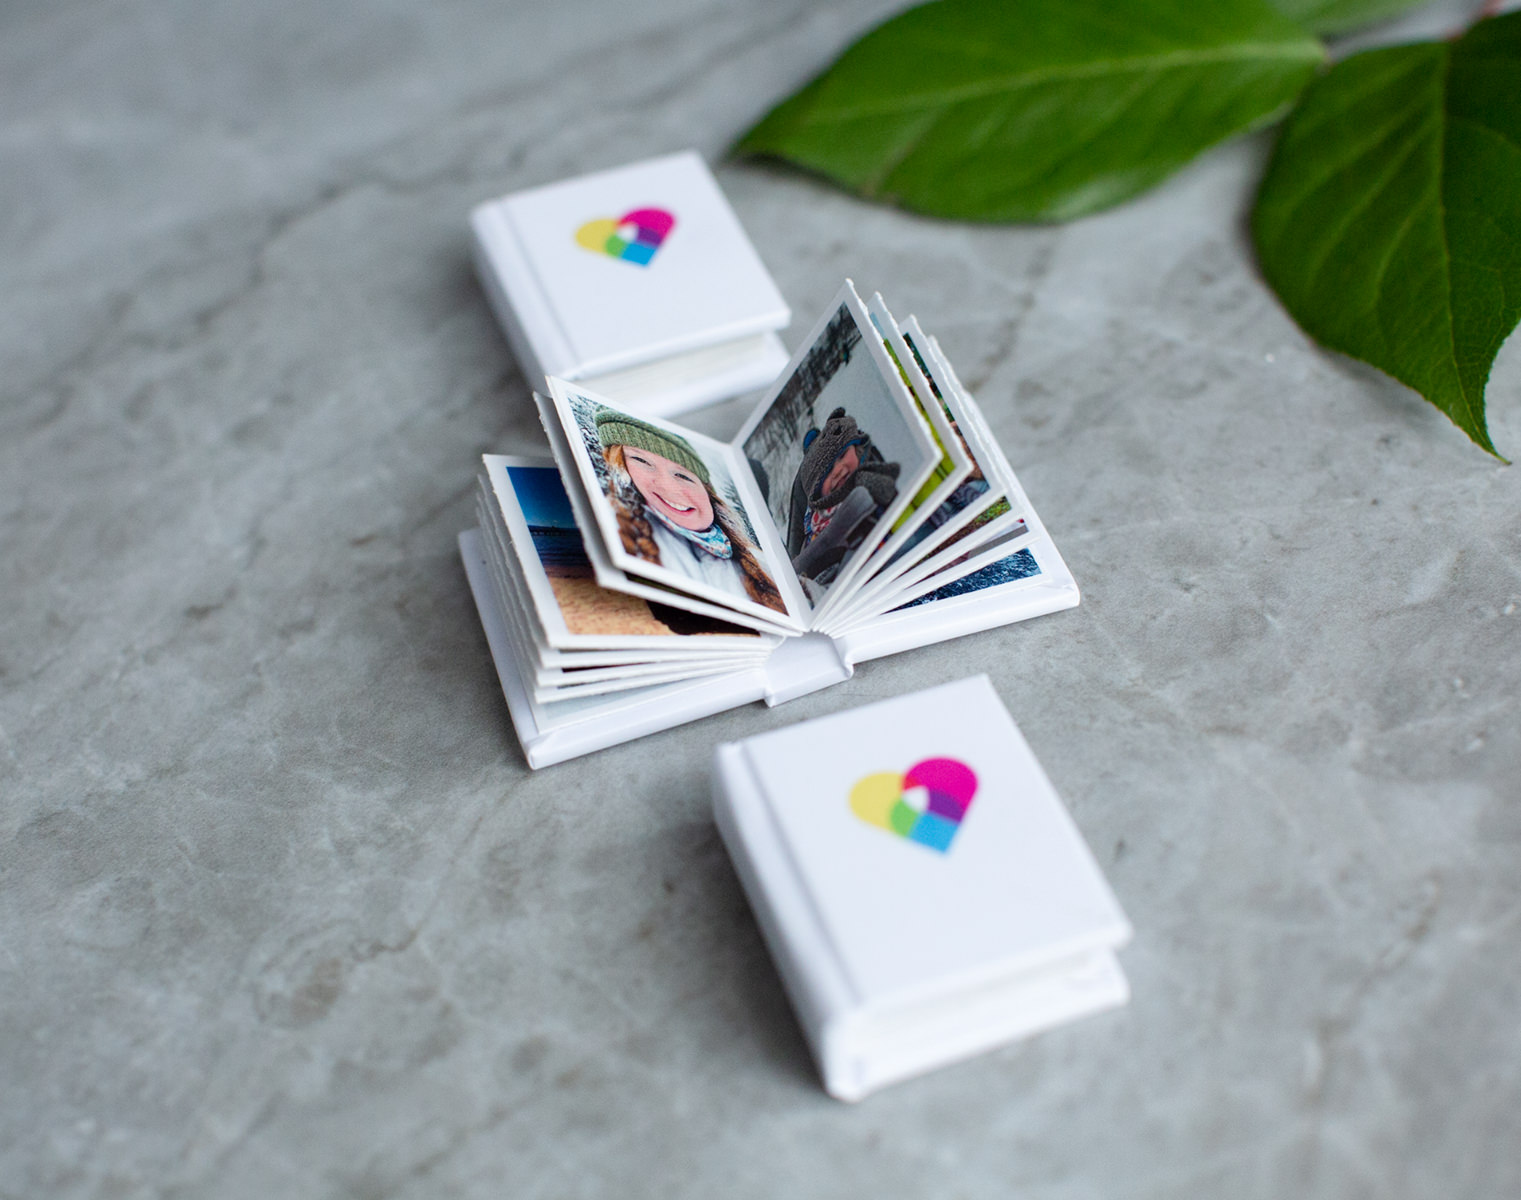 tiny-books-print-up-to-72-of-your-instagram-or-desktop-photos-in-our